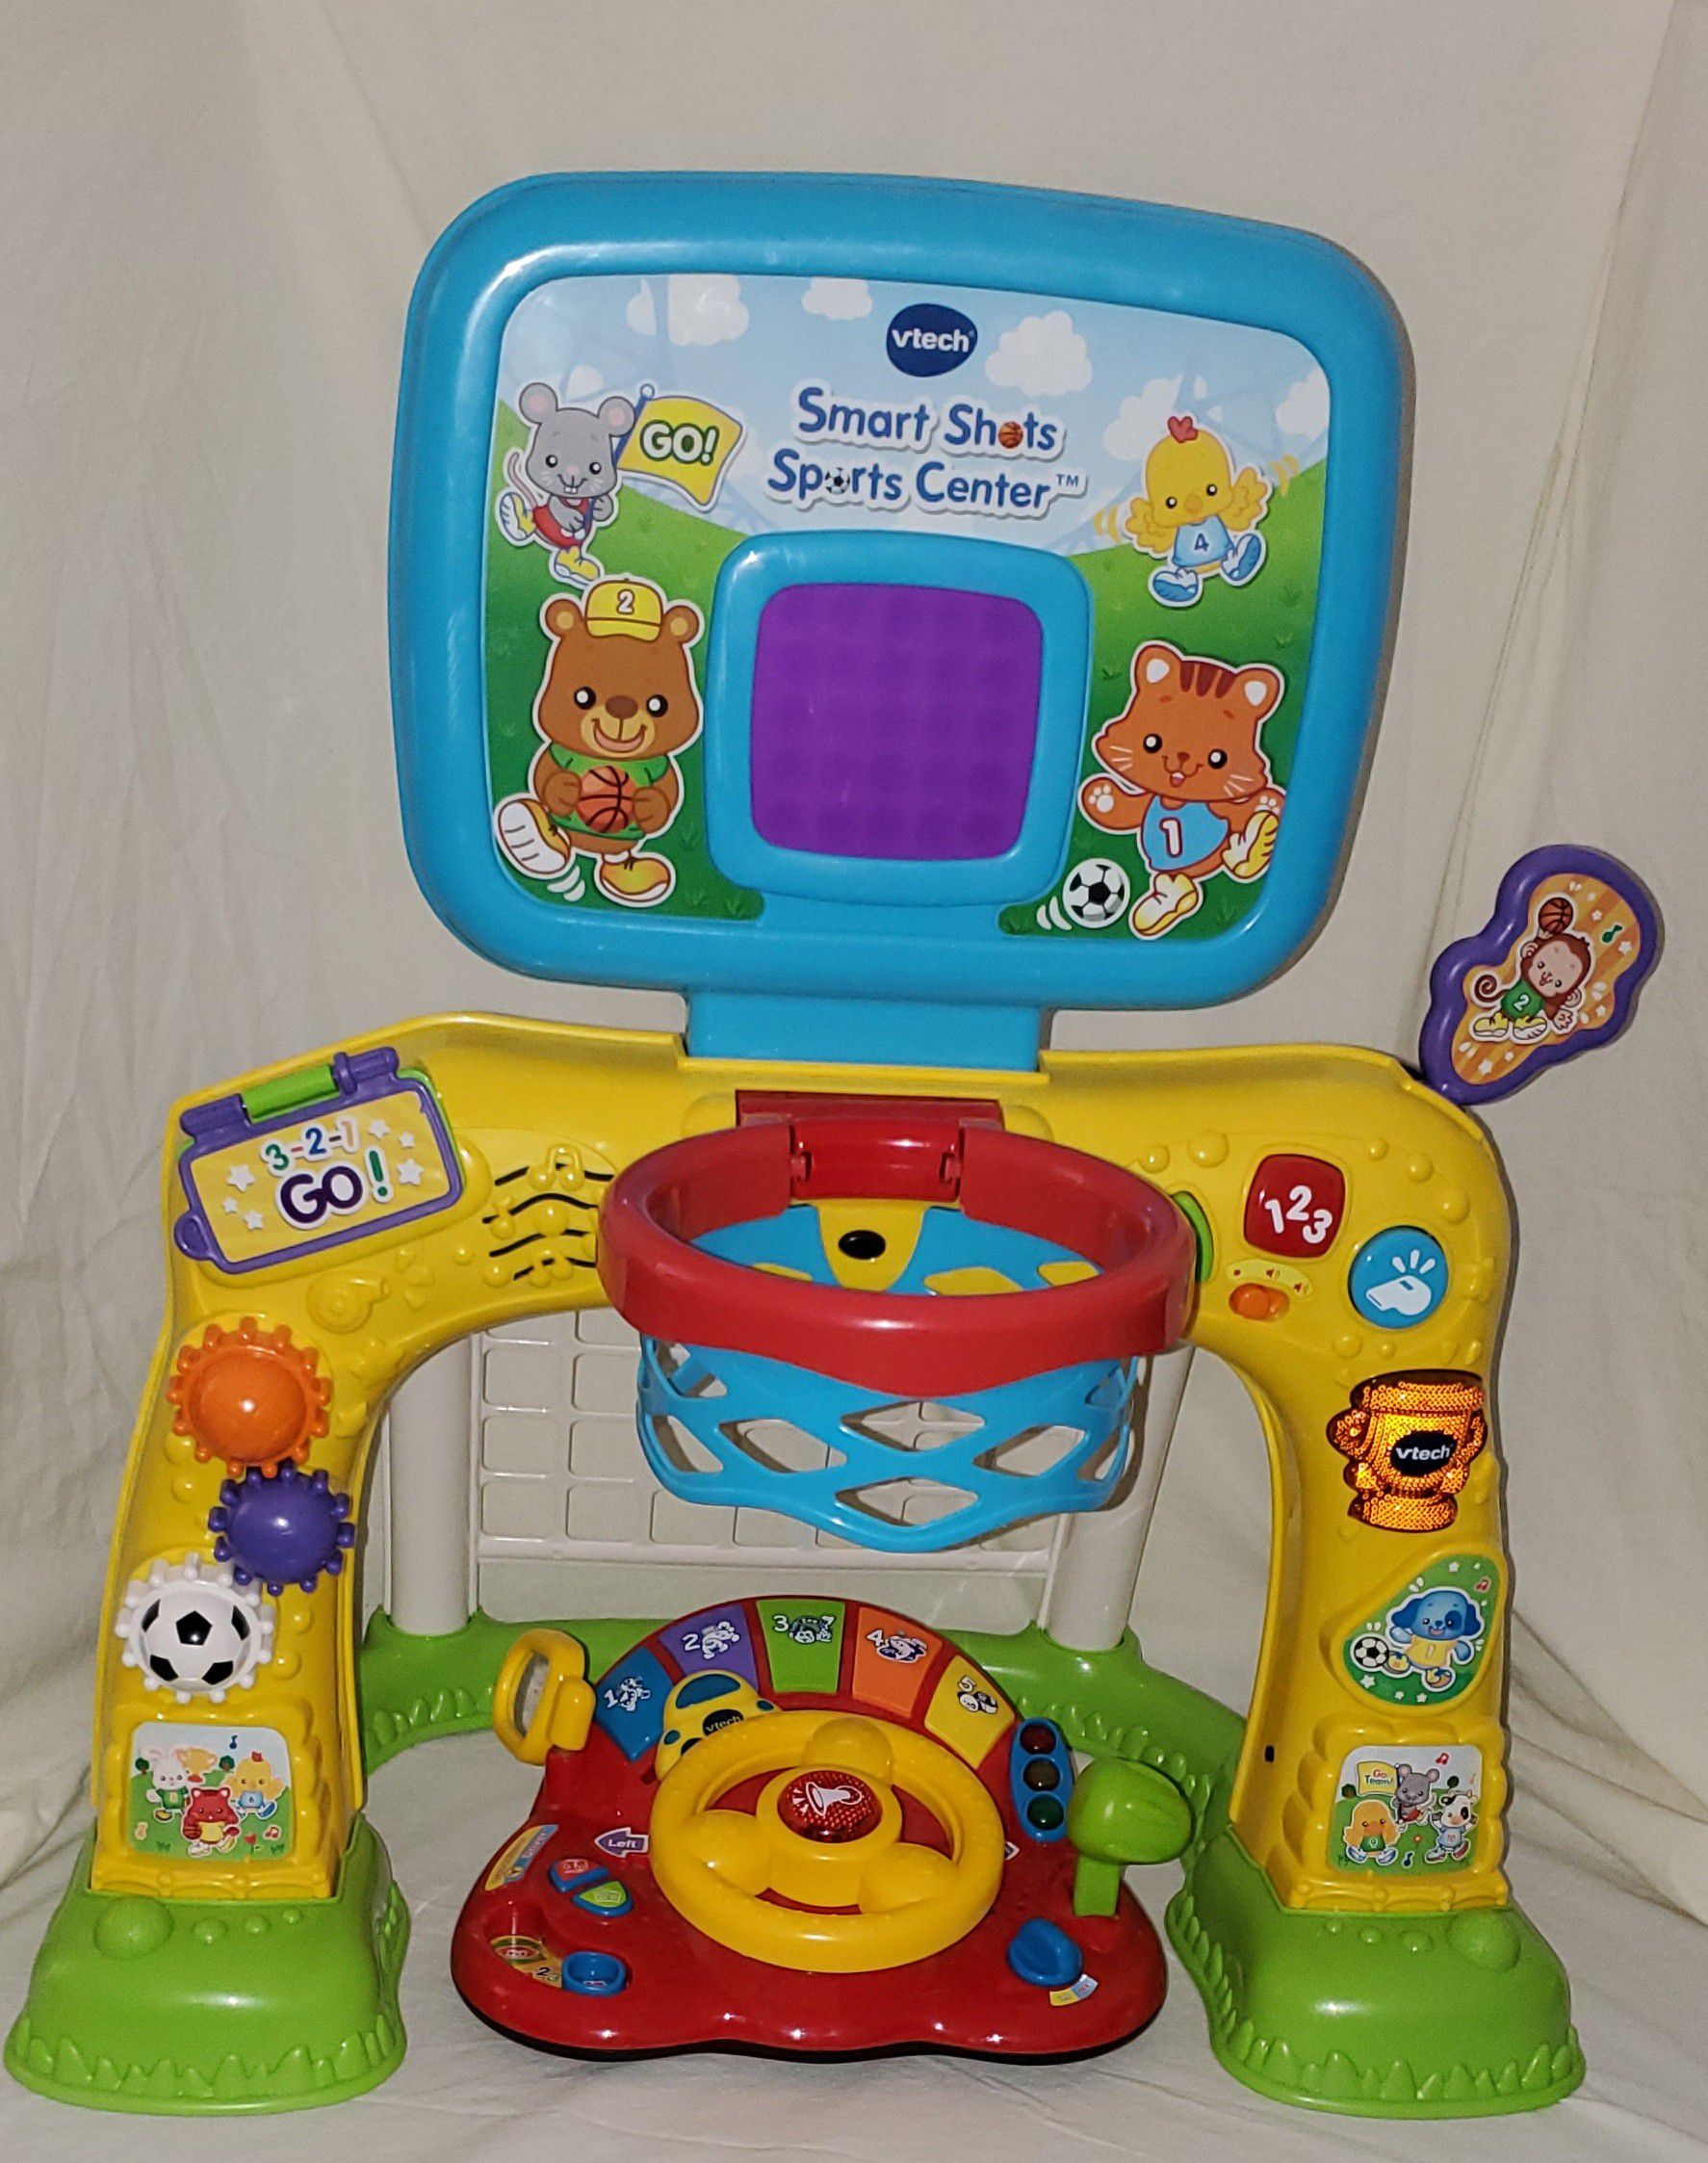 VTech Smart Shots Sports Center and VTech Turn and Learn Driver